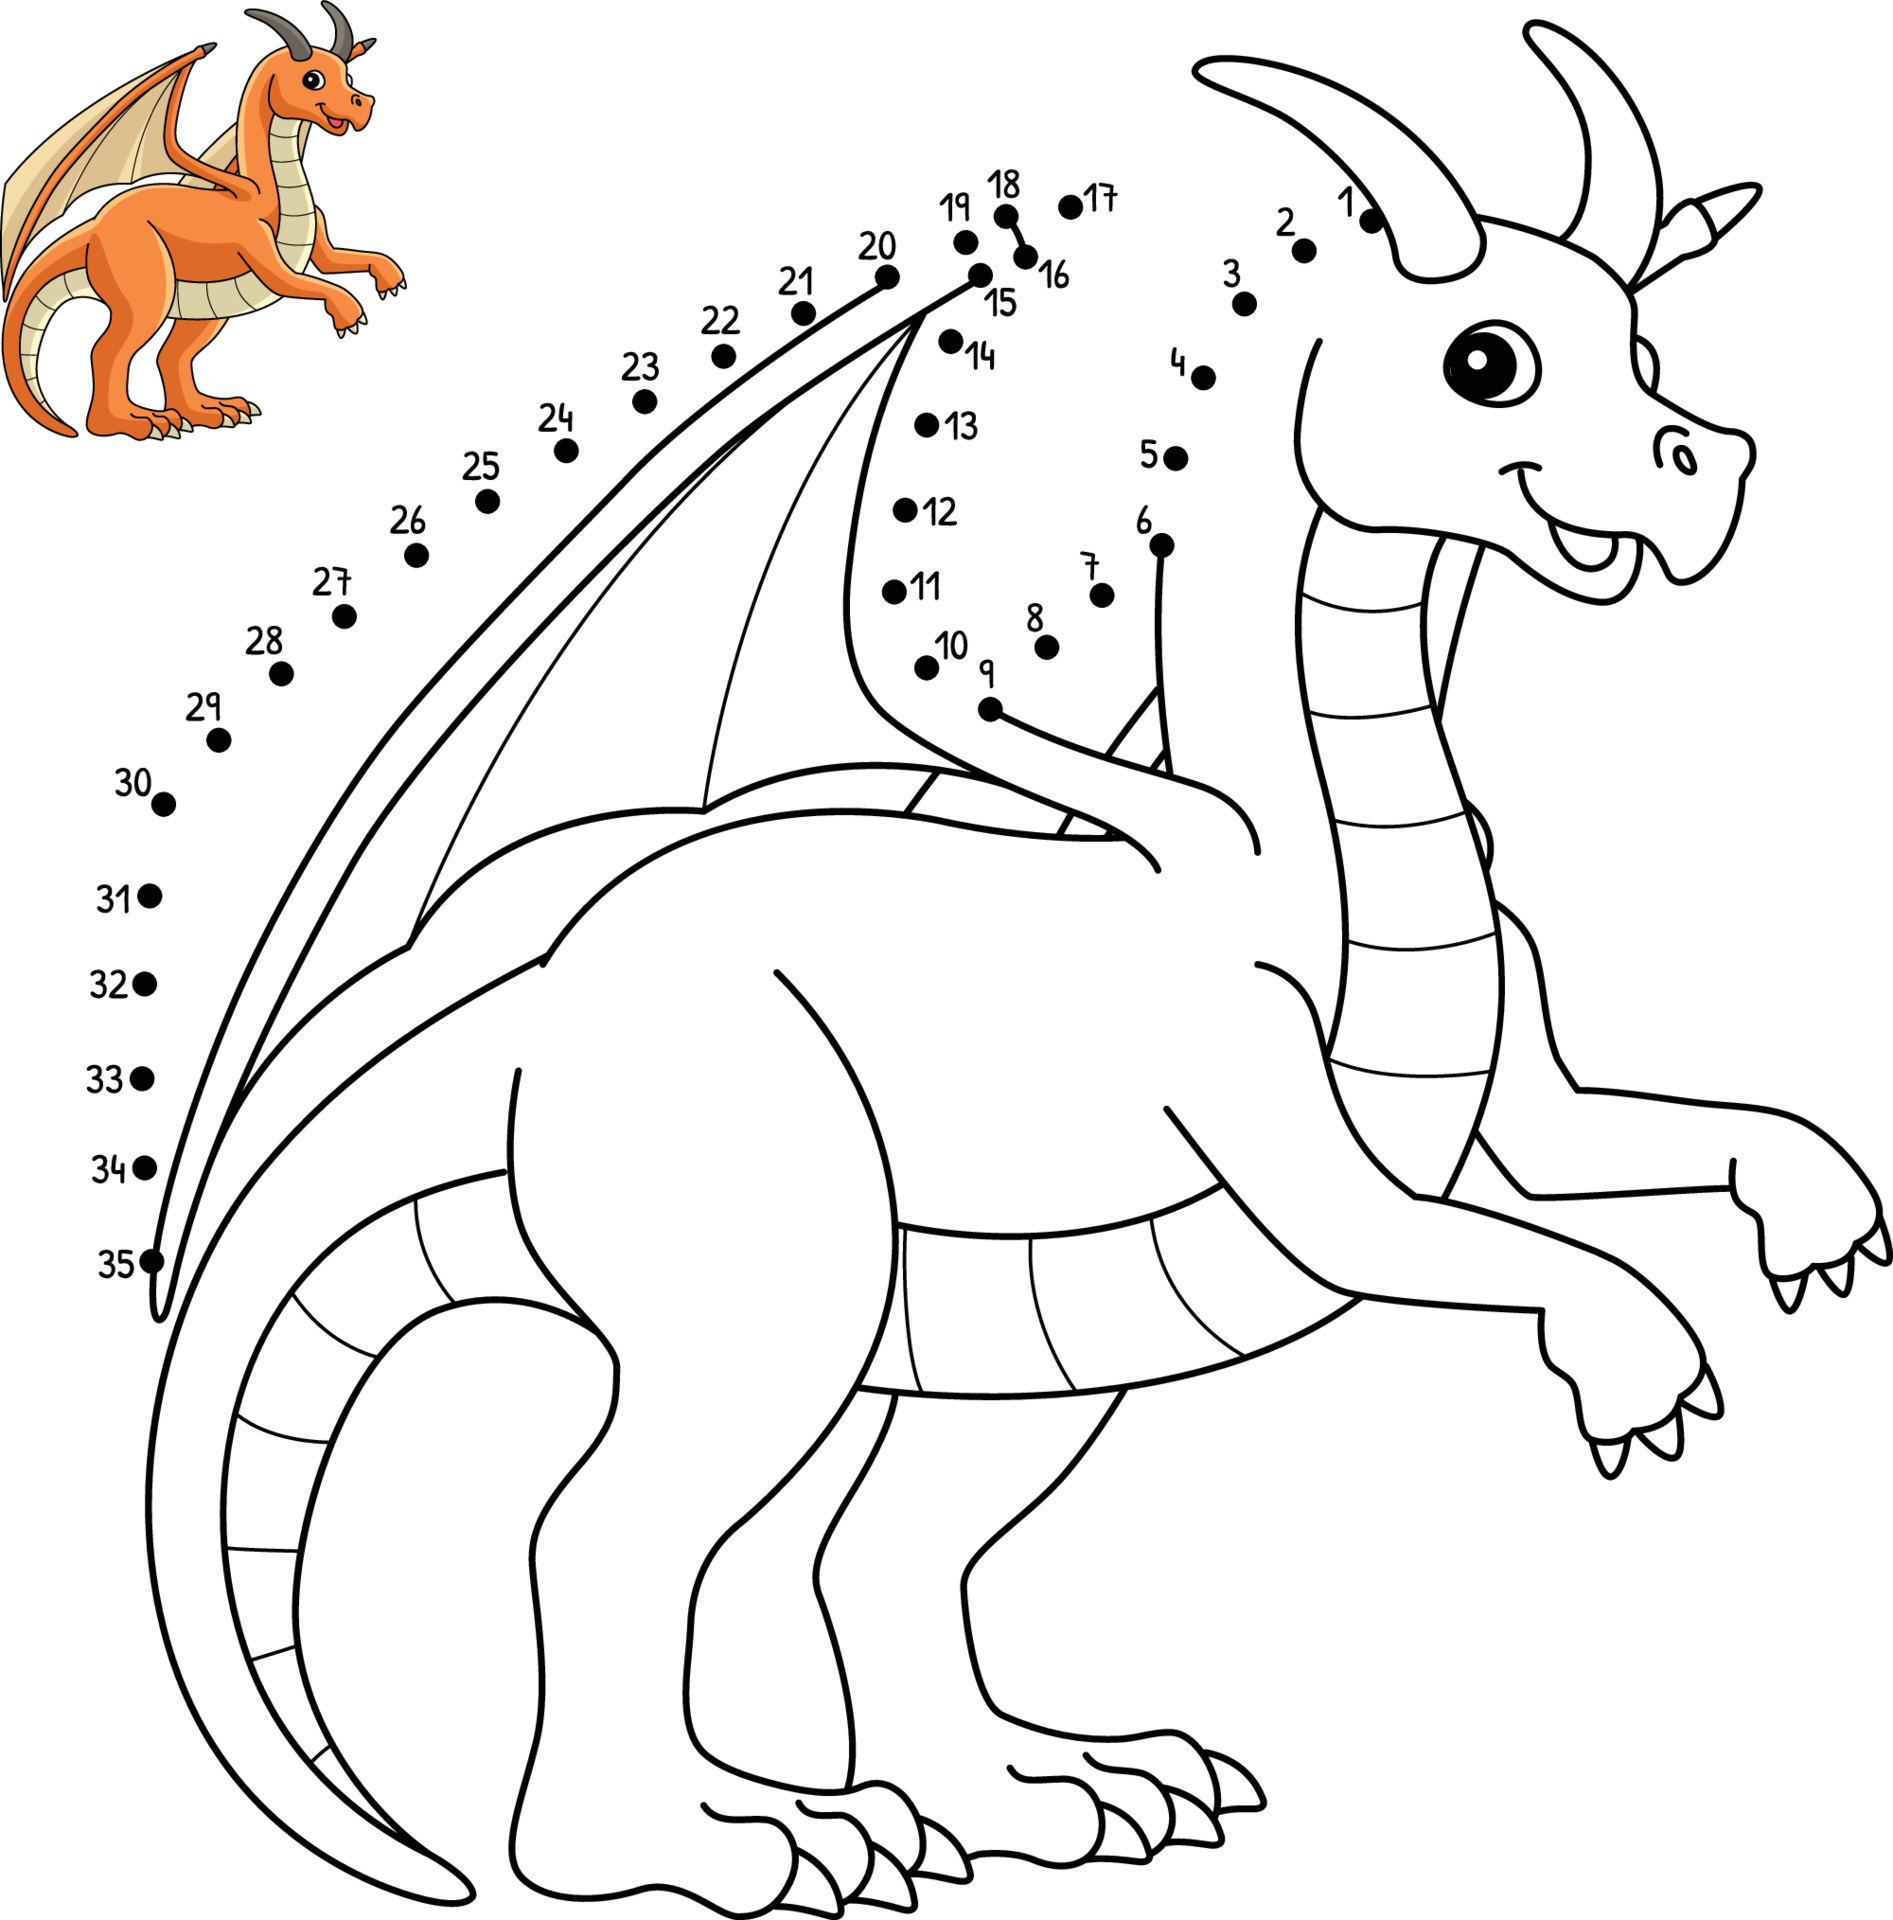 dot-to-dot-dragon-animal-isolated-coloring-page-12626454-vector-art-at